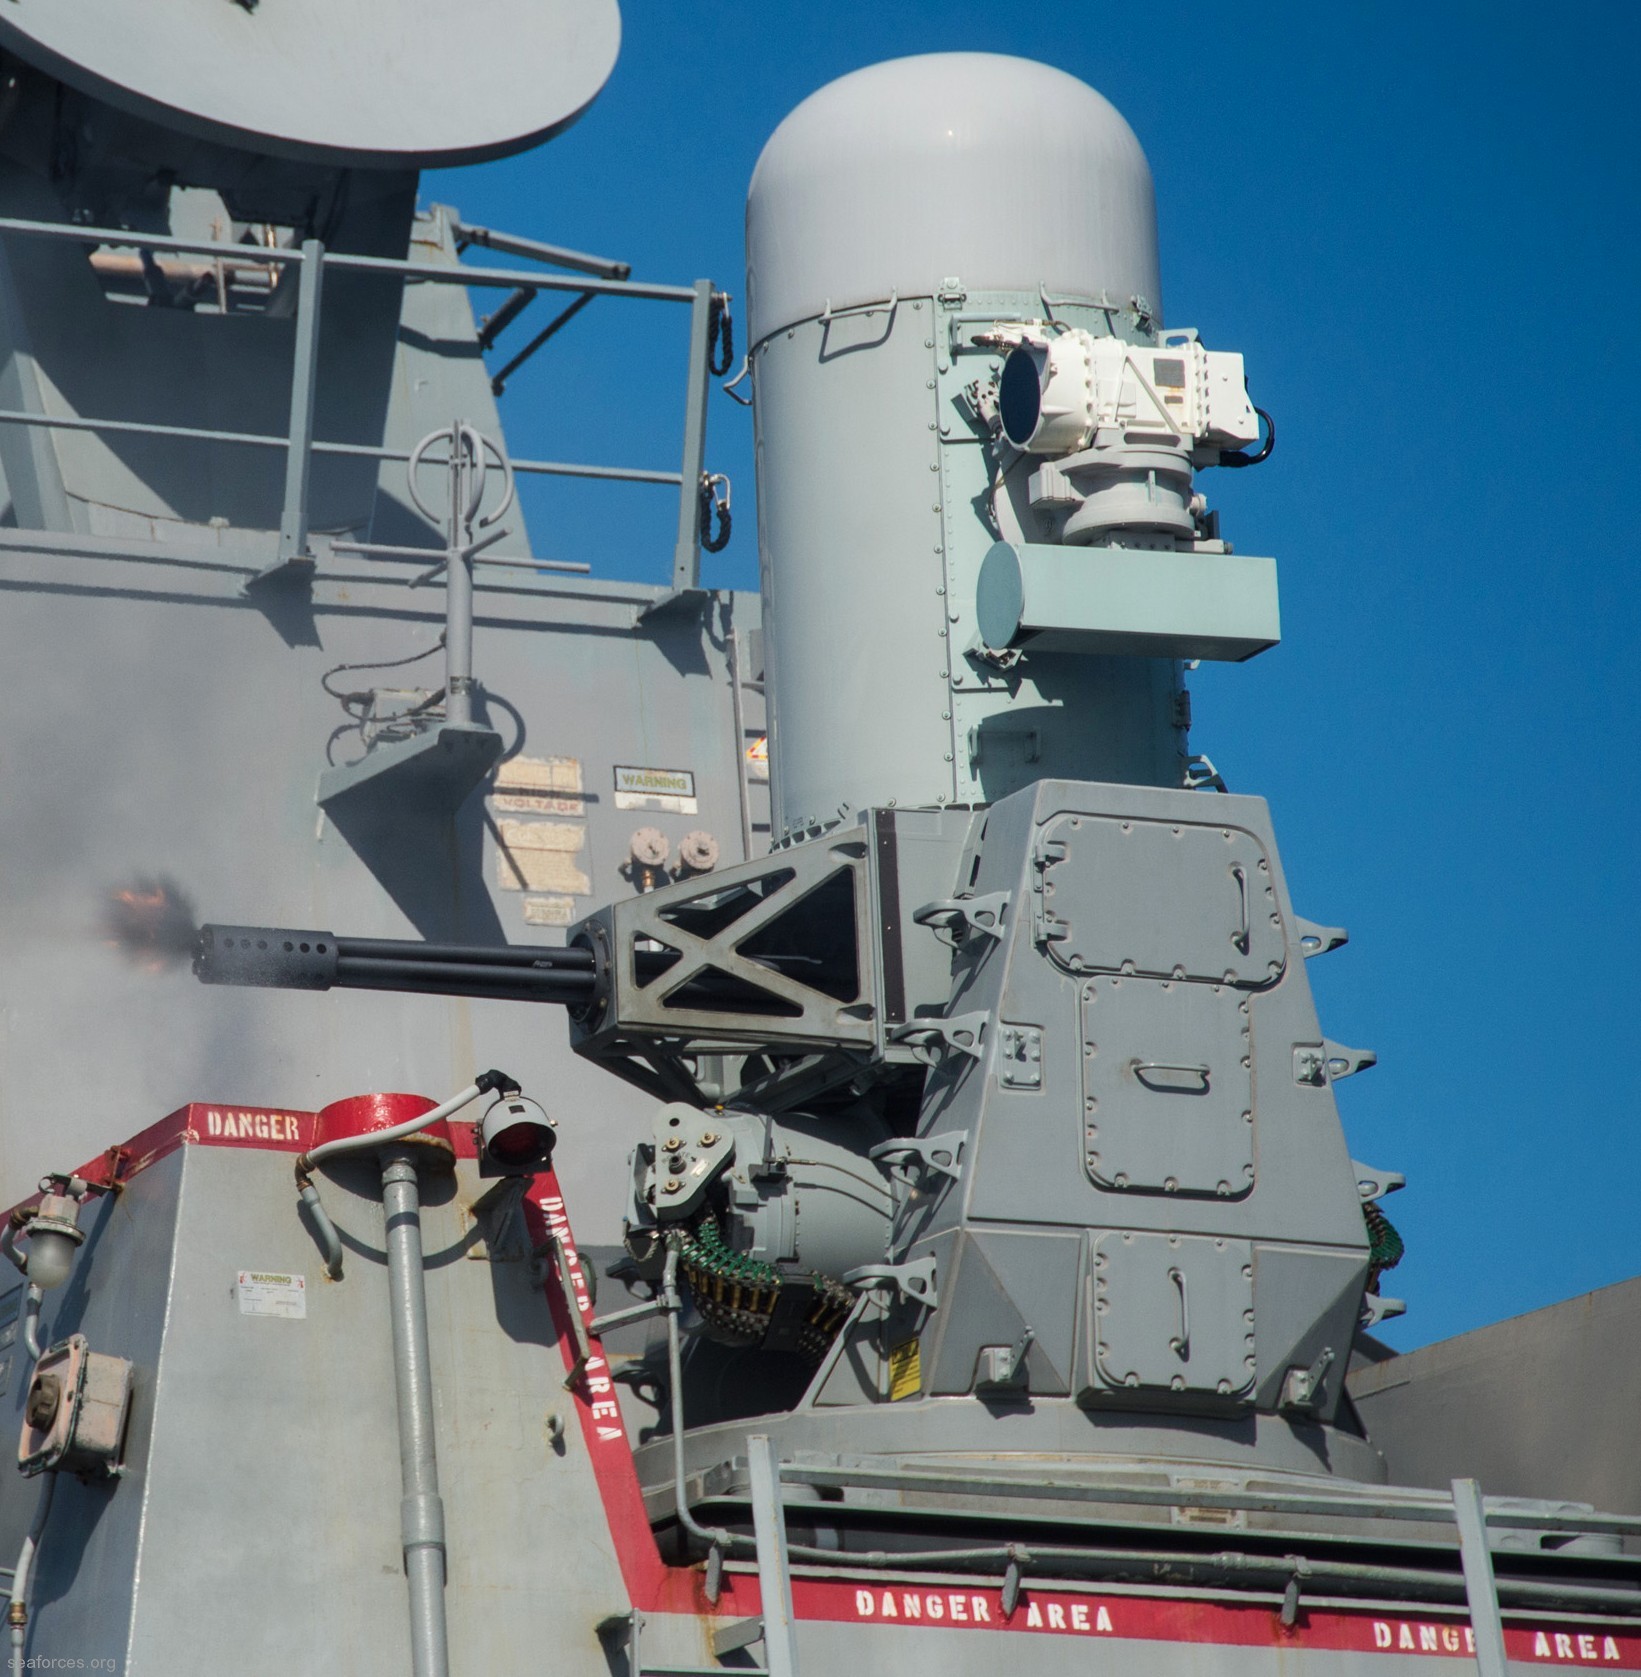 ddg-55 uss stout guided missile destroyer us navy 70 mk-15 phalanx ciws